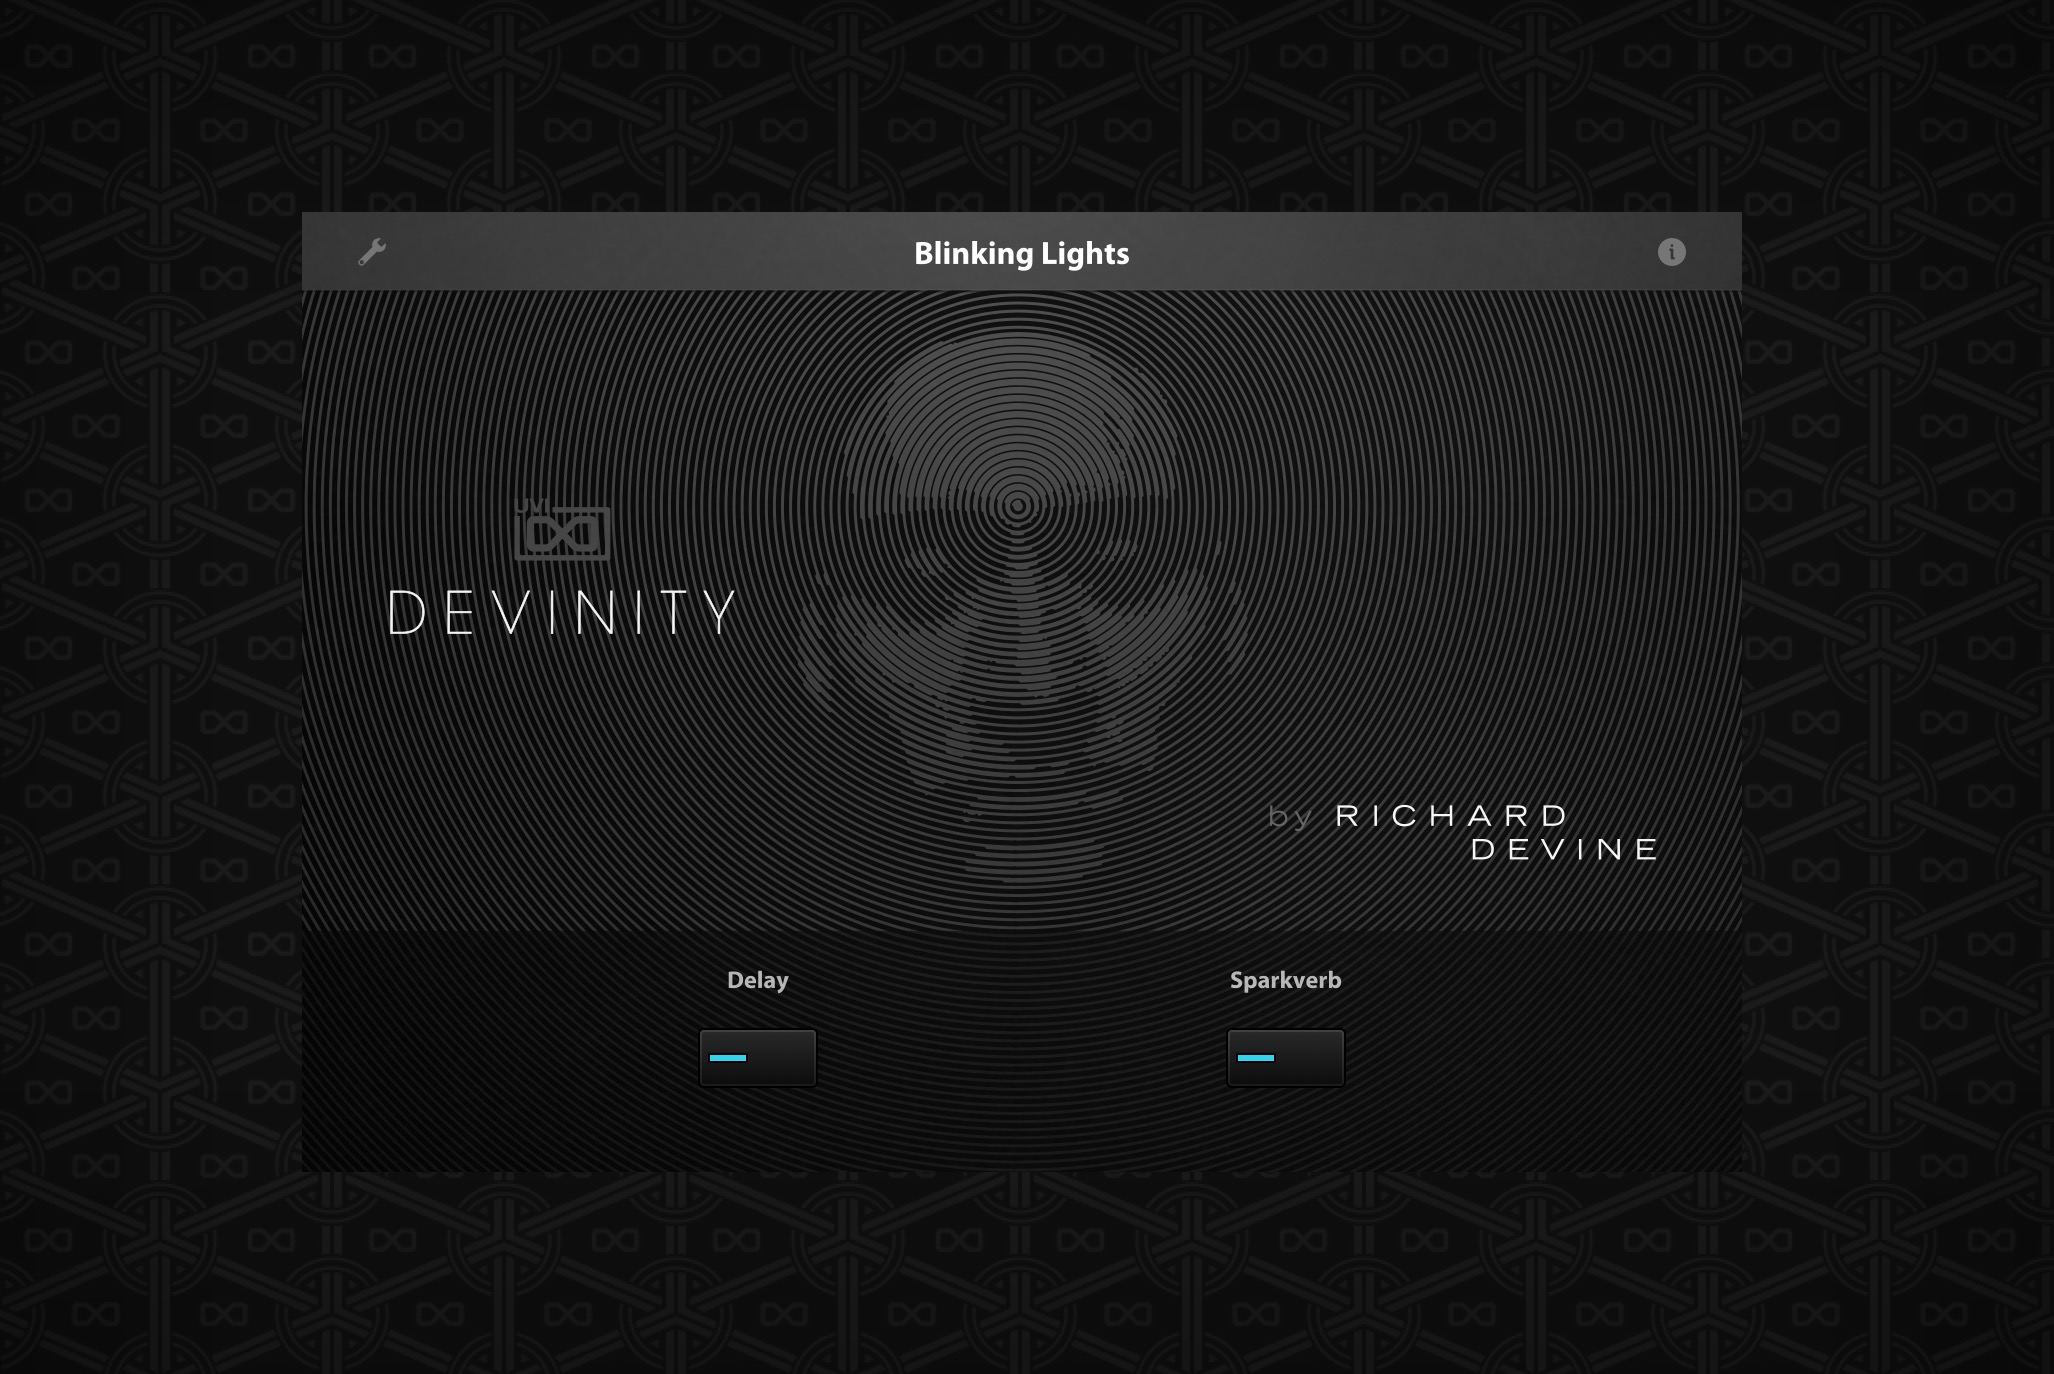 Devinity by Richard Devine (published by UVI) Review